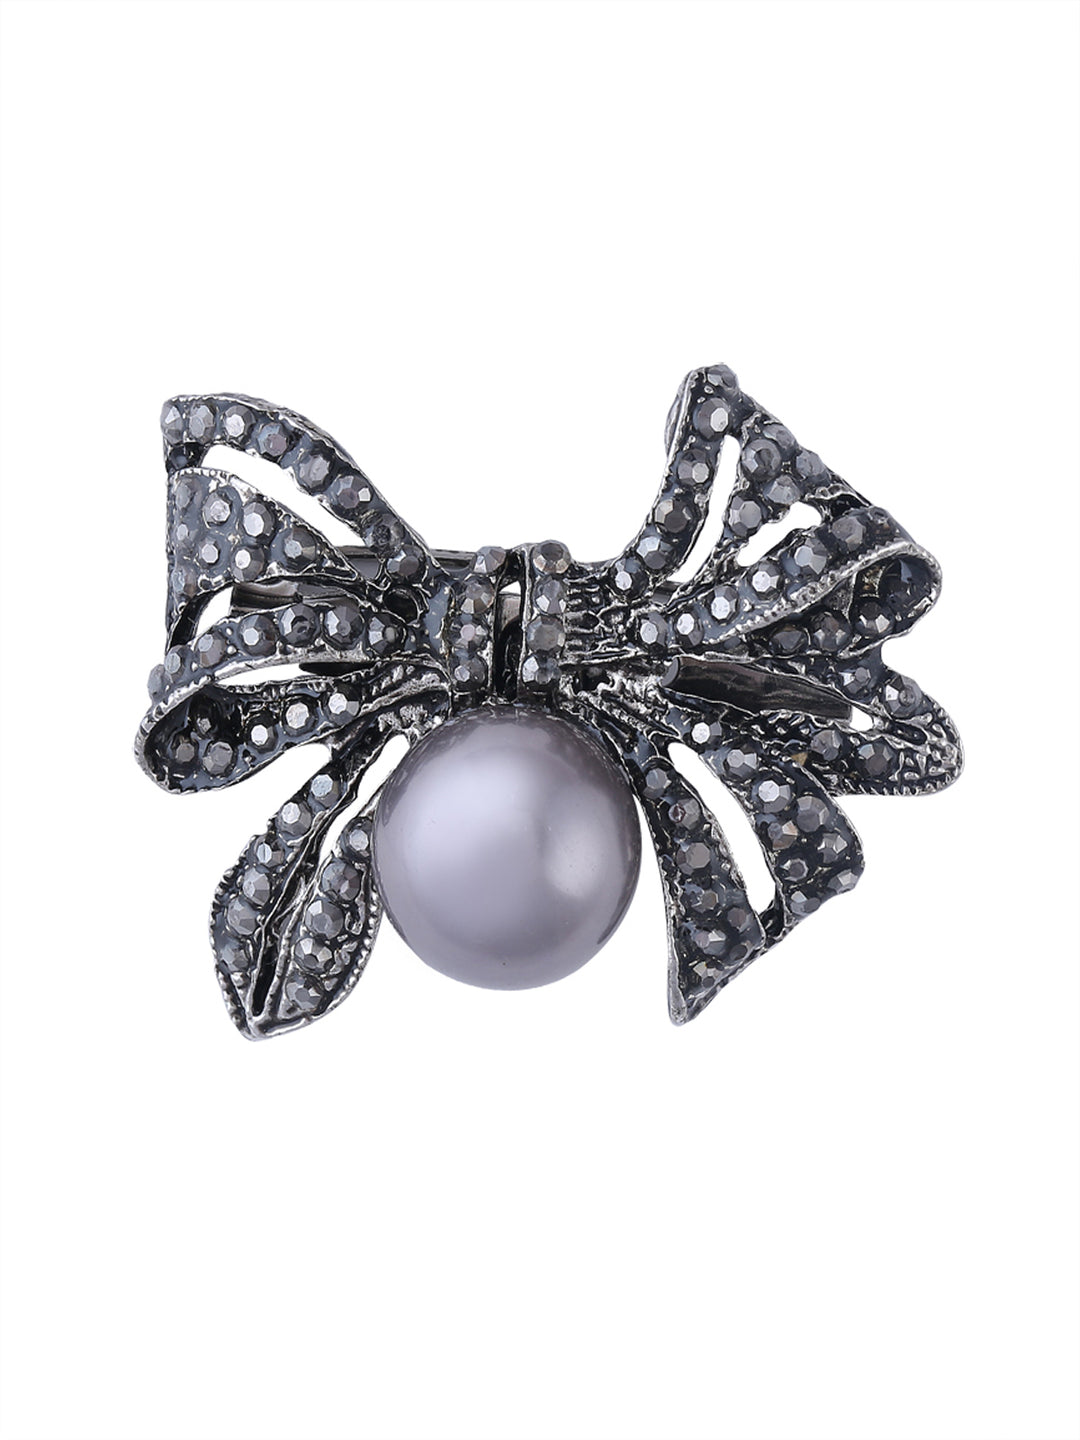 Bow-Knot Design Diamond And Pearl Exquisite Black Nickel (Gun Metal) Brooch Pin